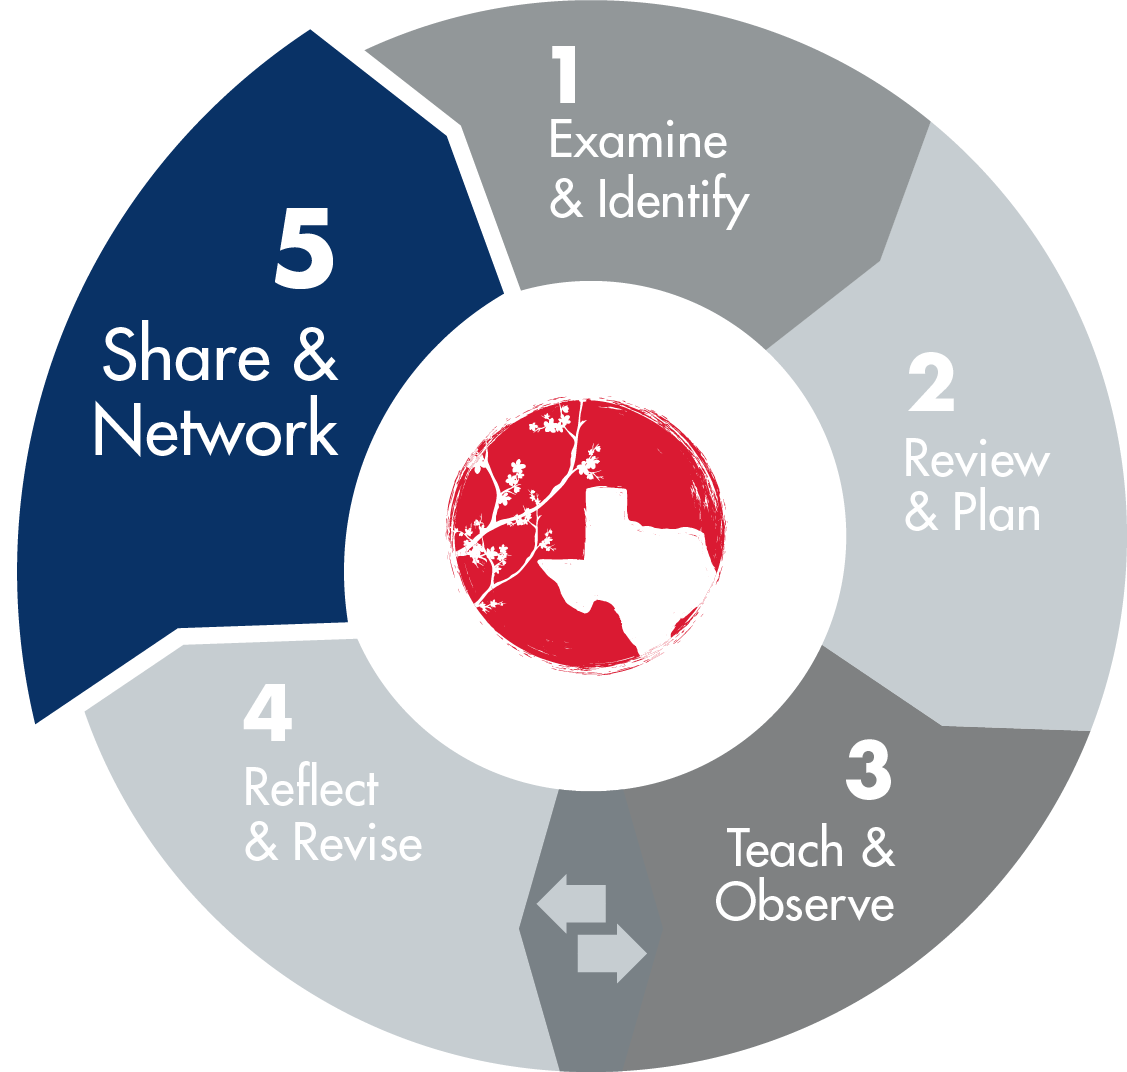 TEXAS LESSON STUDY  5 PHASES - 1. Examine & Identify, 2. Review & Plan, 3. Teach & Observe, 4. Reflect & Revise and 5. Share & Network,  where phase 5 is visually selected